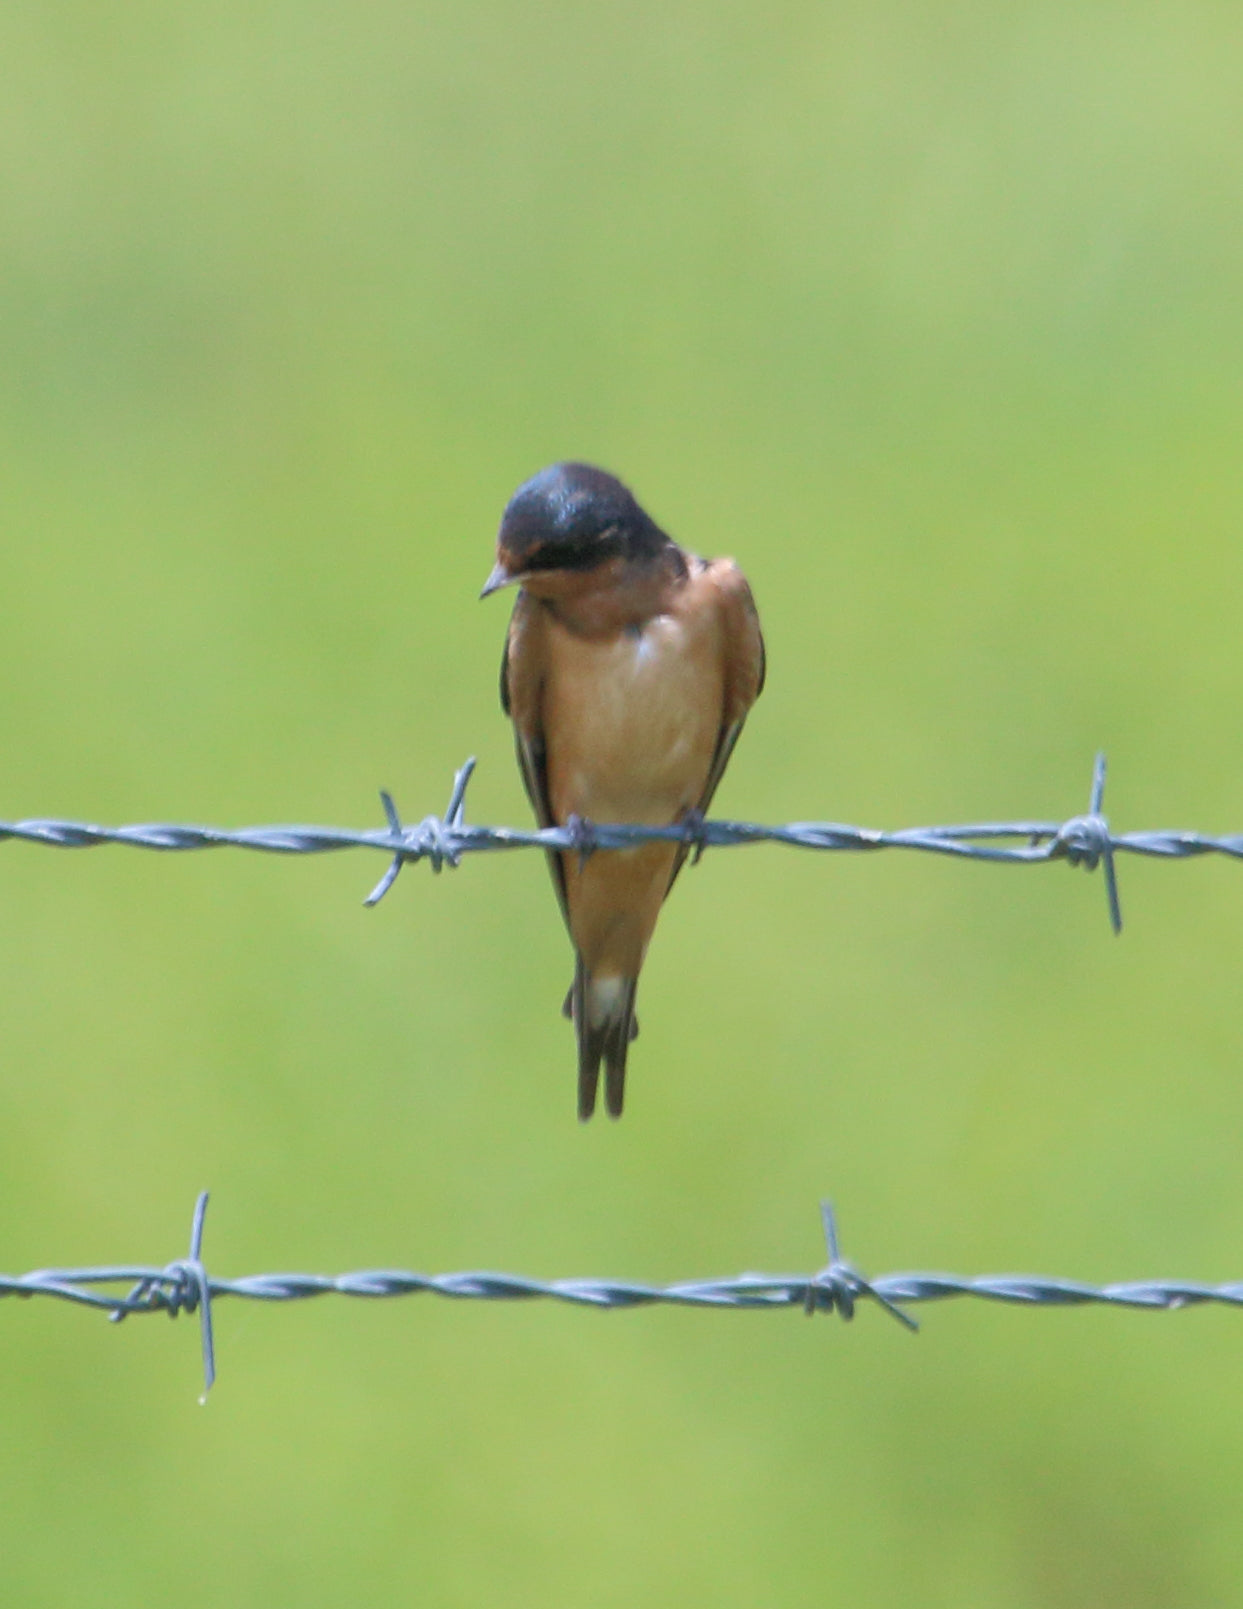 Barn Swallow on barbed wire fence